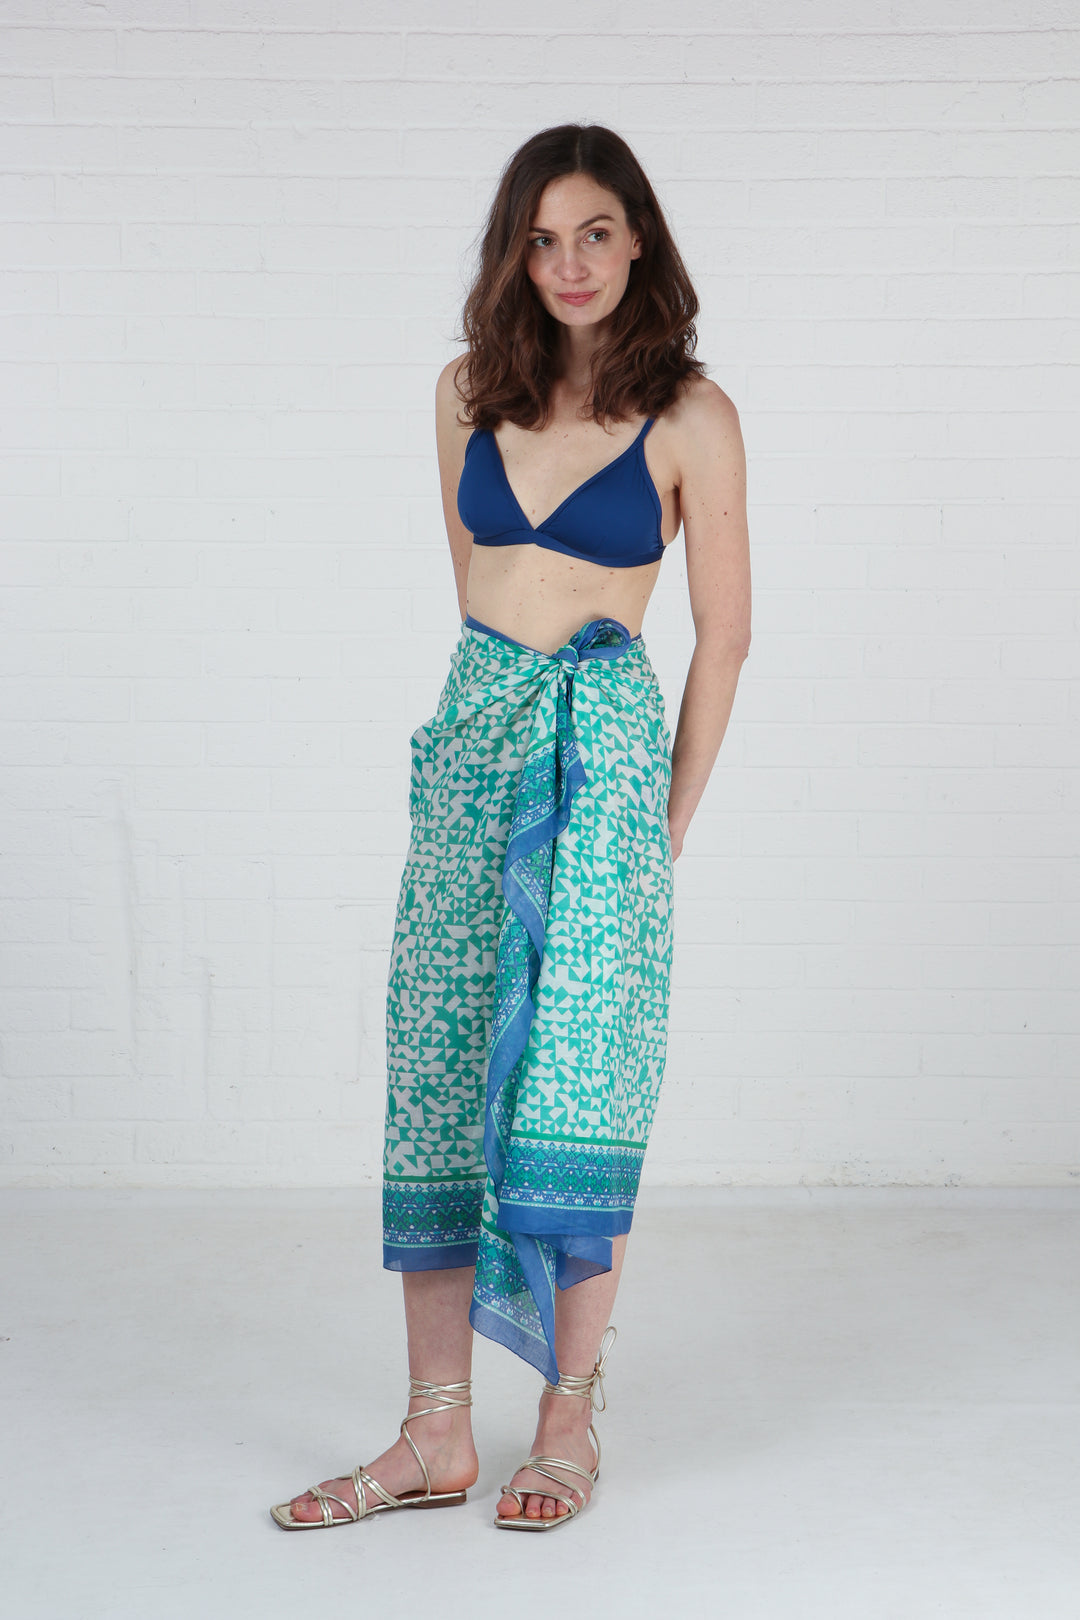 model wearing this green mosaic patterned scarf as a beach sarong skirt